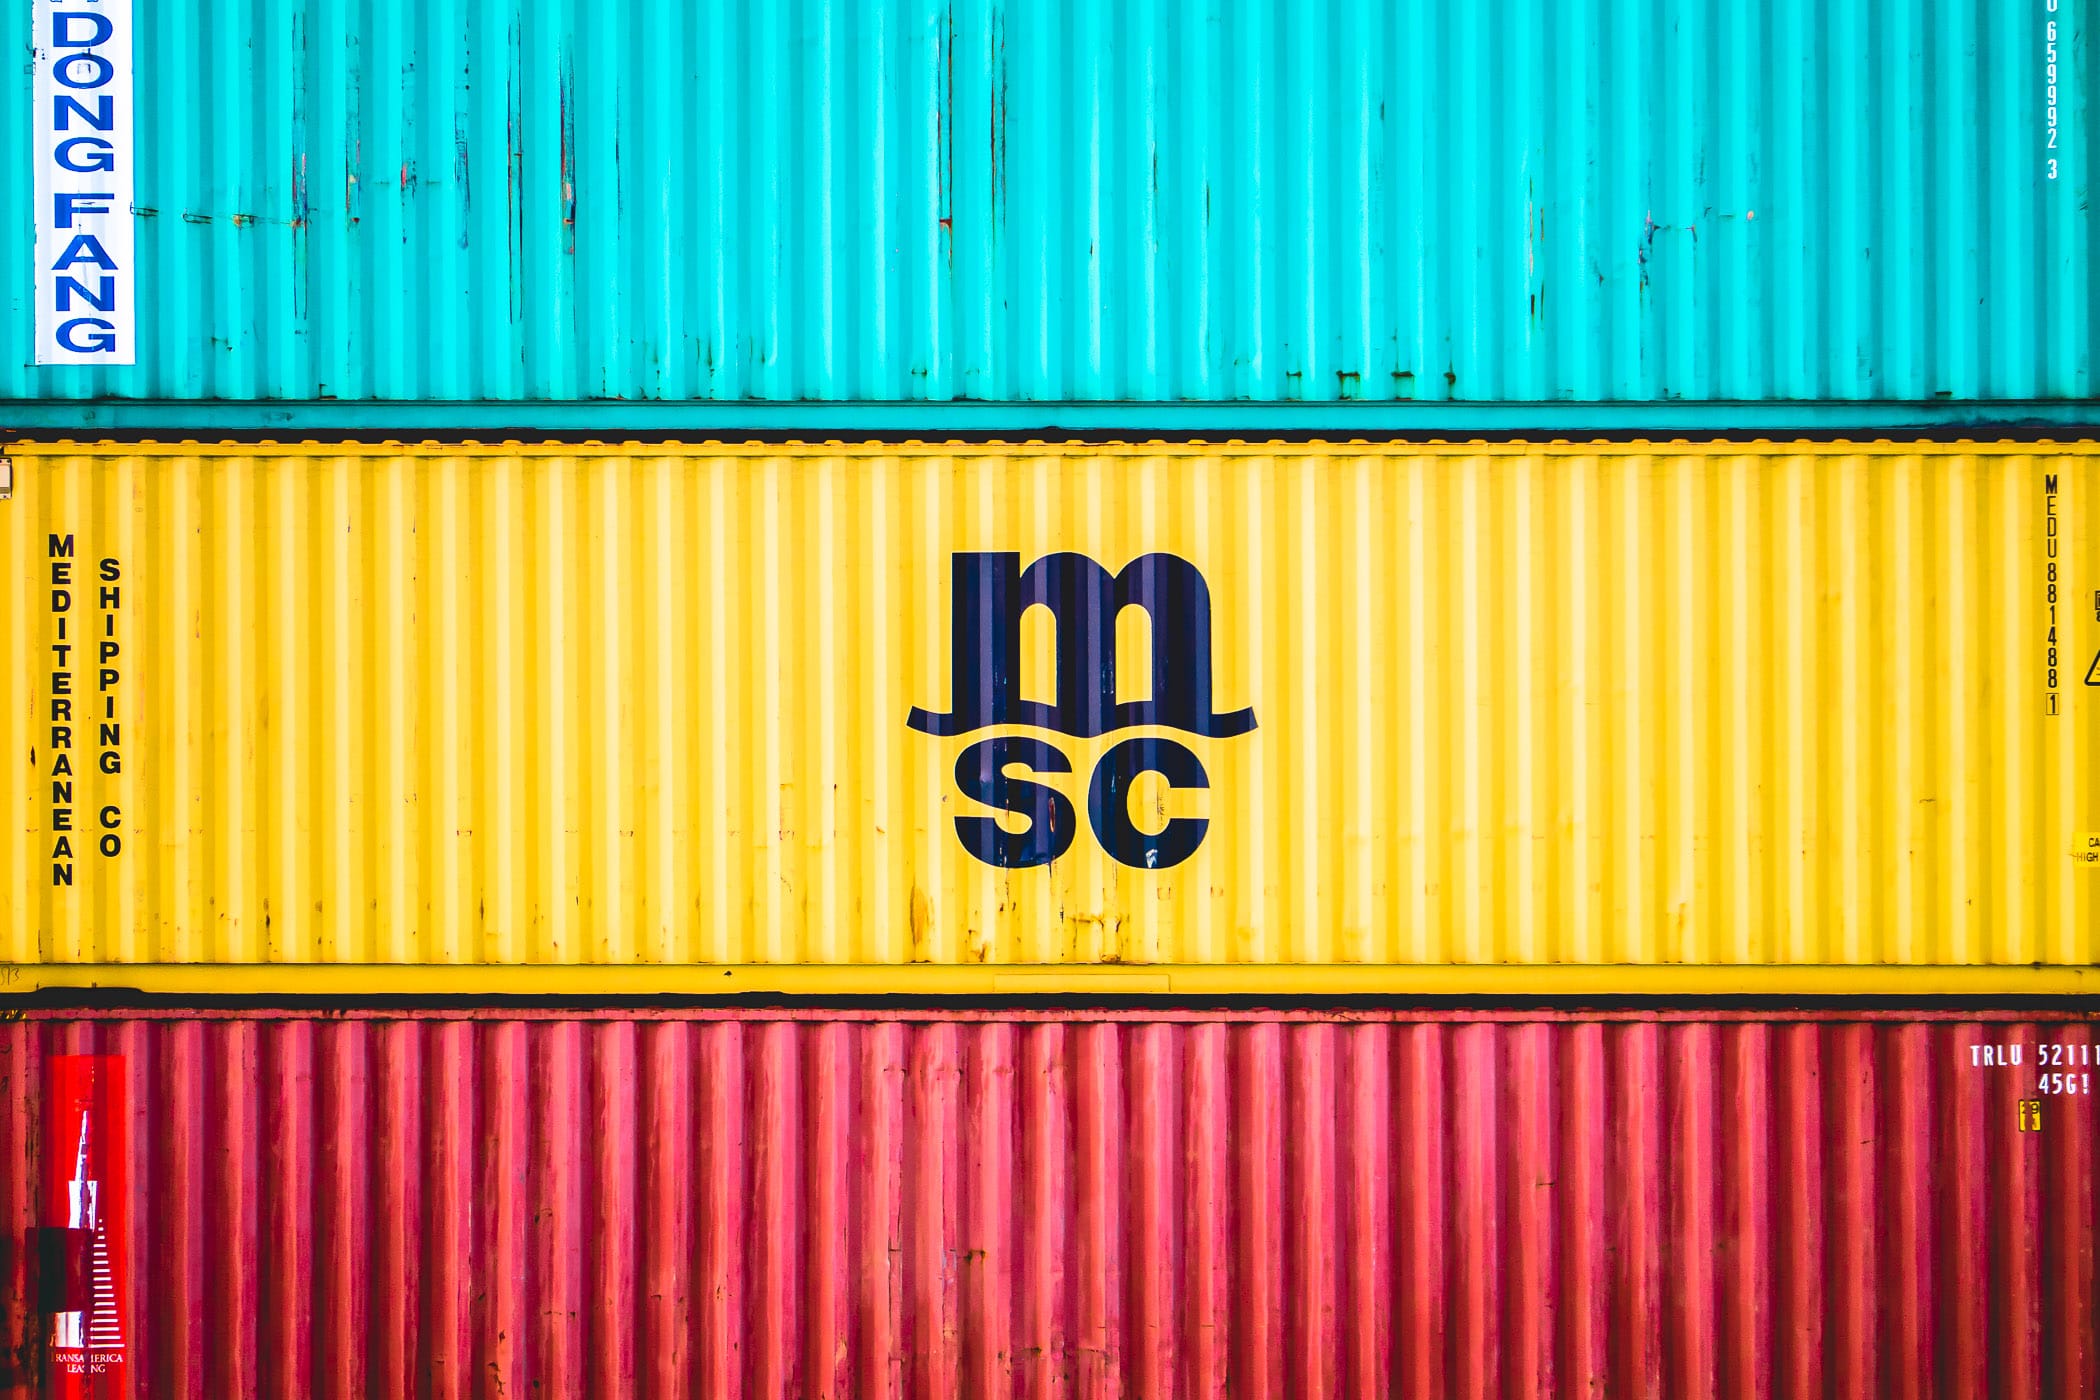 Multi-colored shipping containers of the Mediterranean Shipping Company sit stacked in a container yard in Freeport, Bahamas.